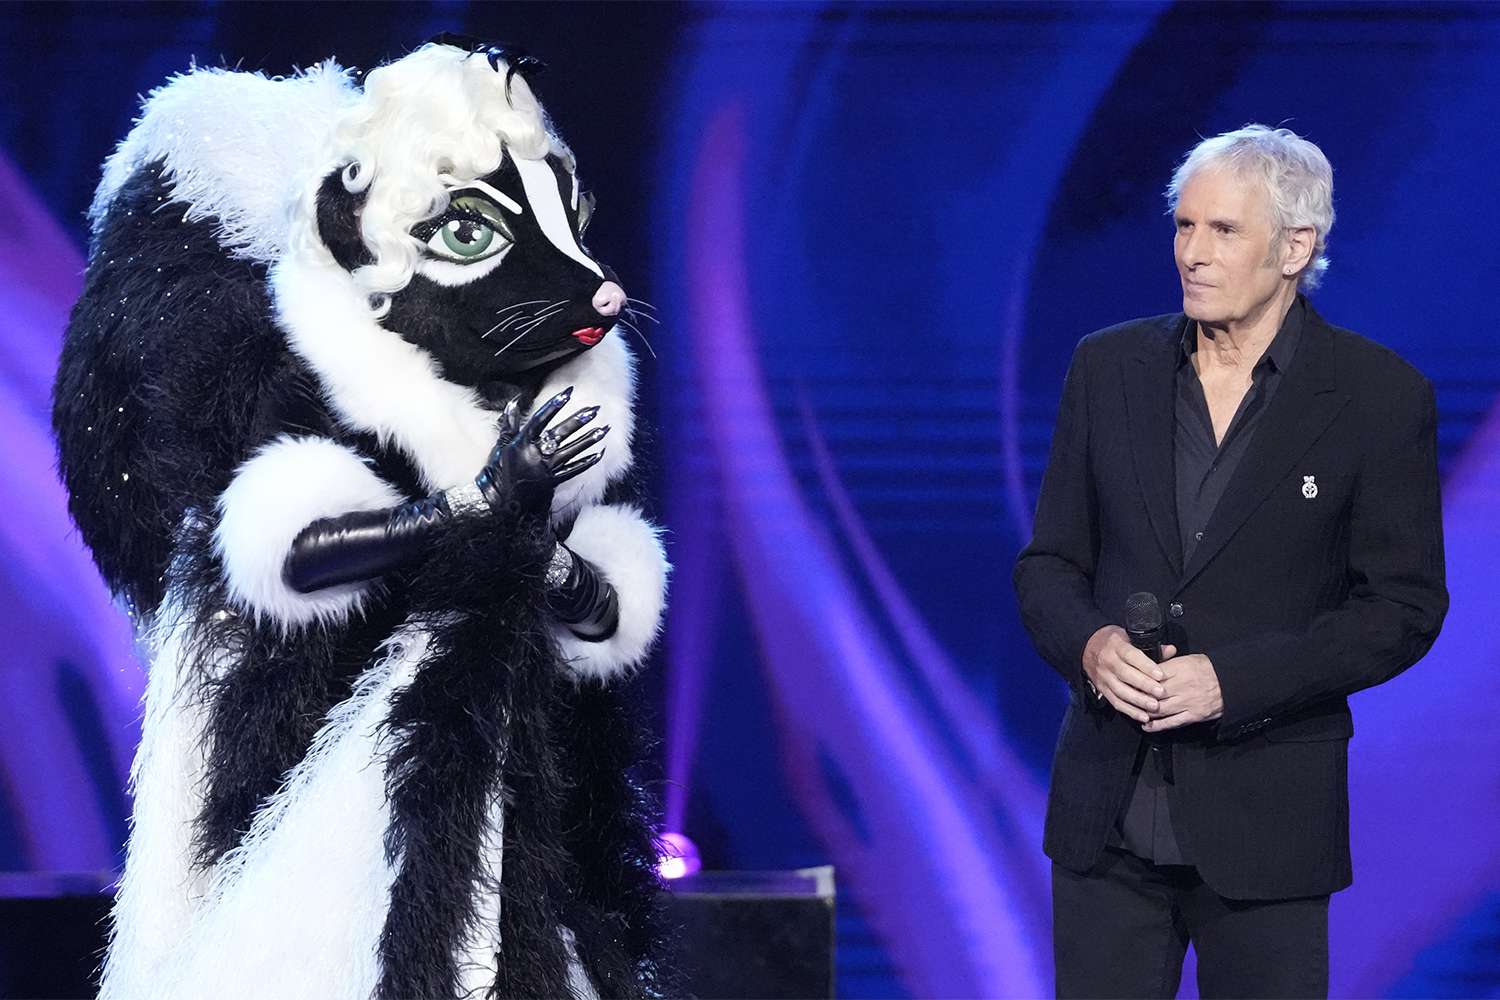 SKUNK AND MICHAEL BOLTON